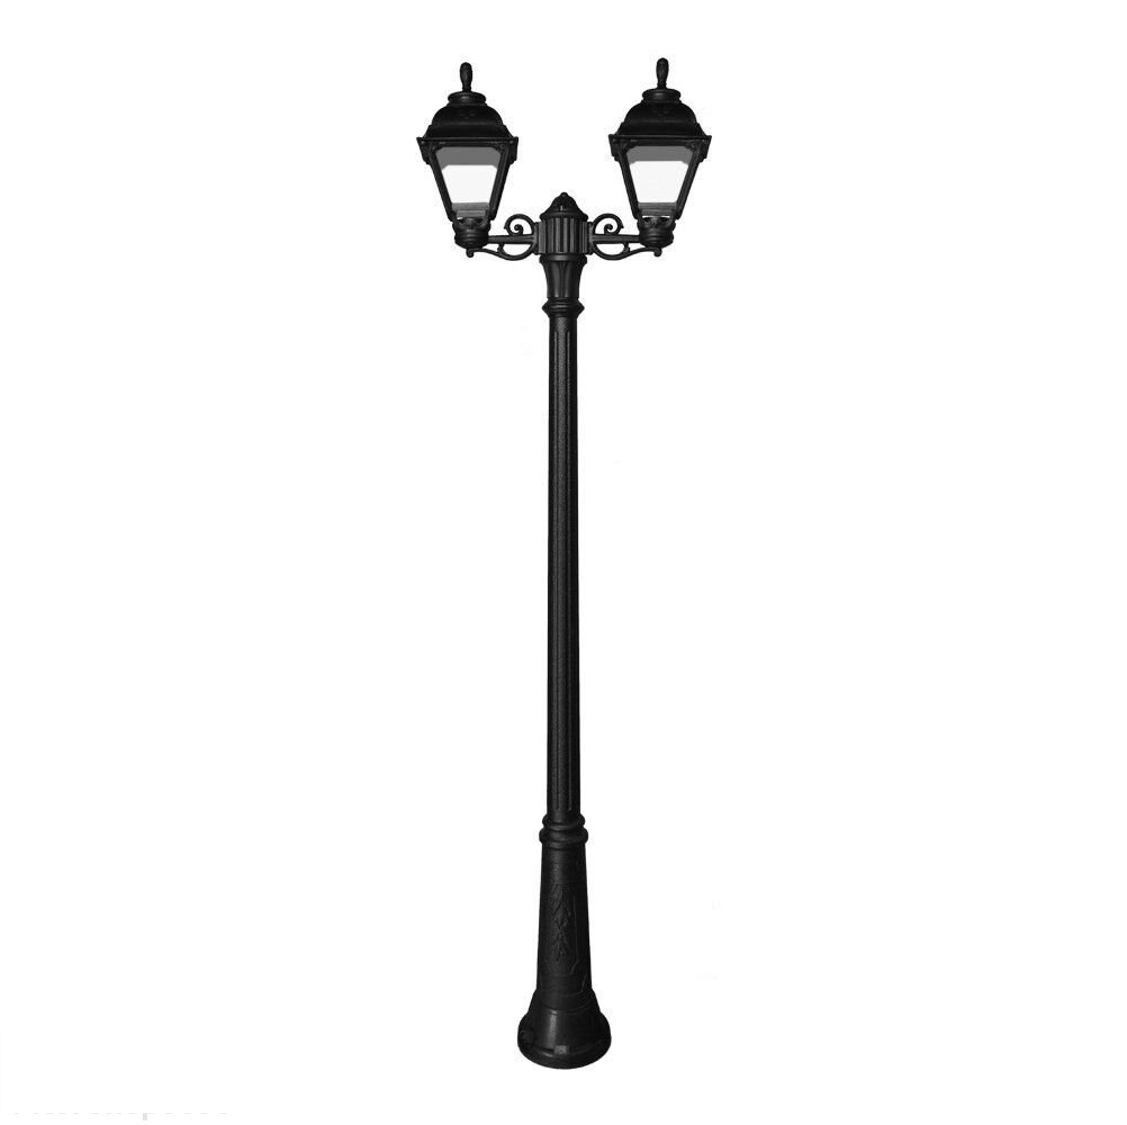 FUMAGALLI - RICU BISSO/CEFA 2L Outdoor Post Light with Clear Diffuser (Black)